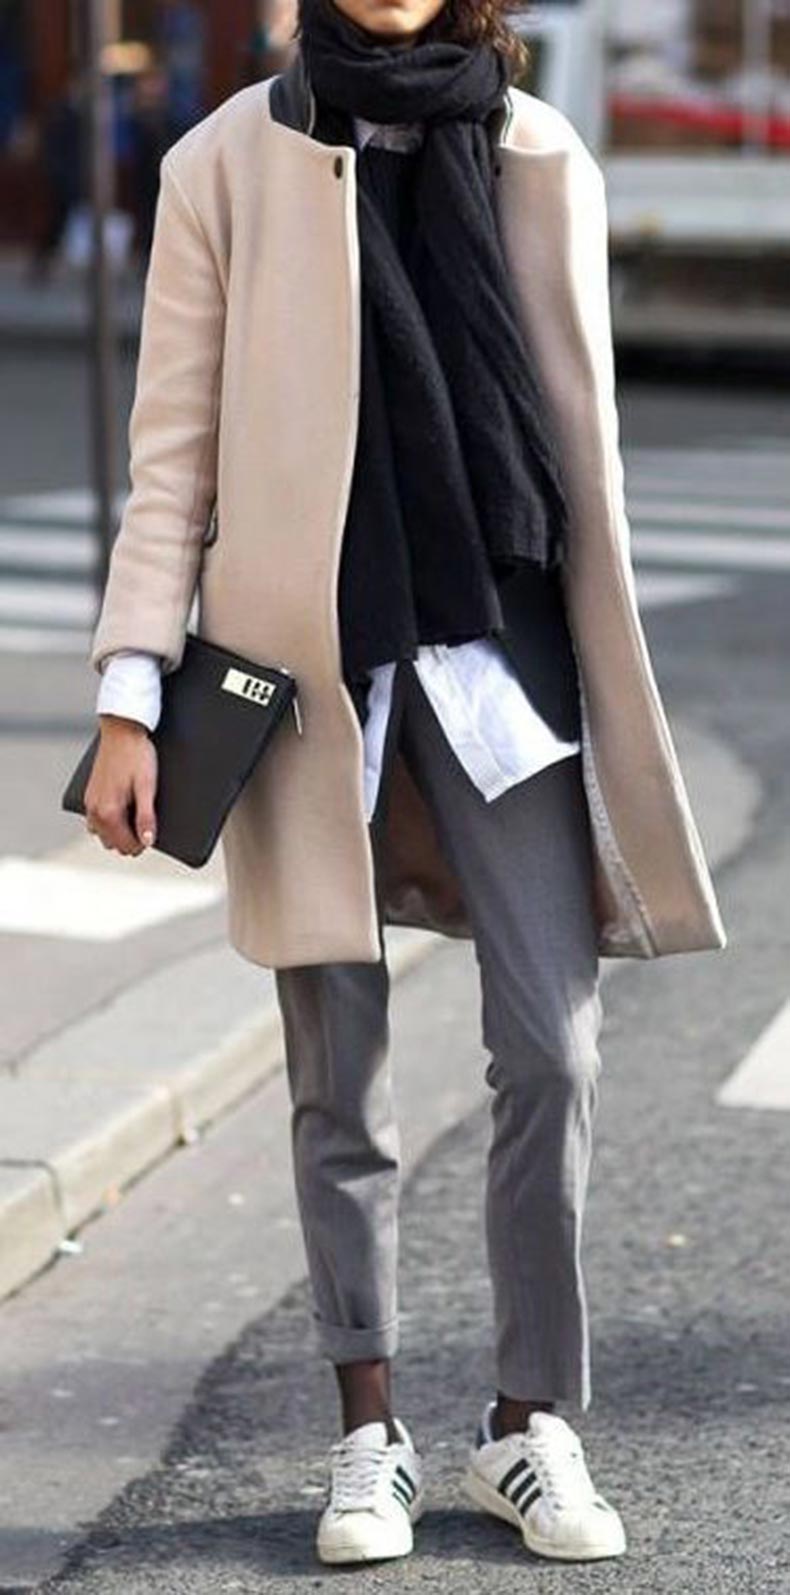 cool layered outfit idea / sneakers + grey pants + beige coat + scarf + shirt + clutch